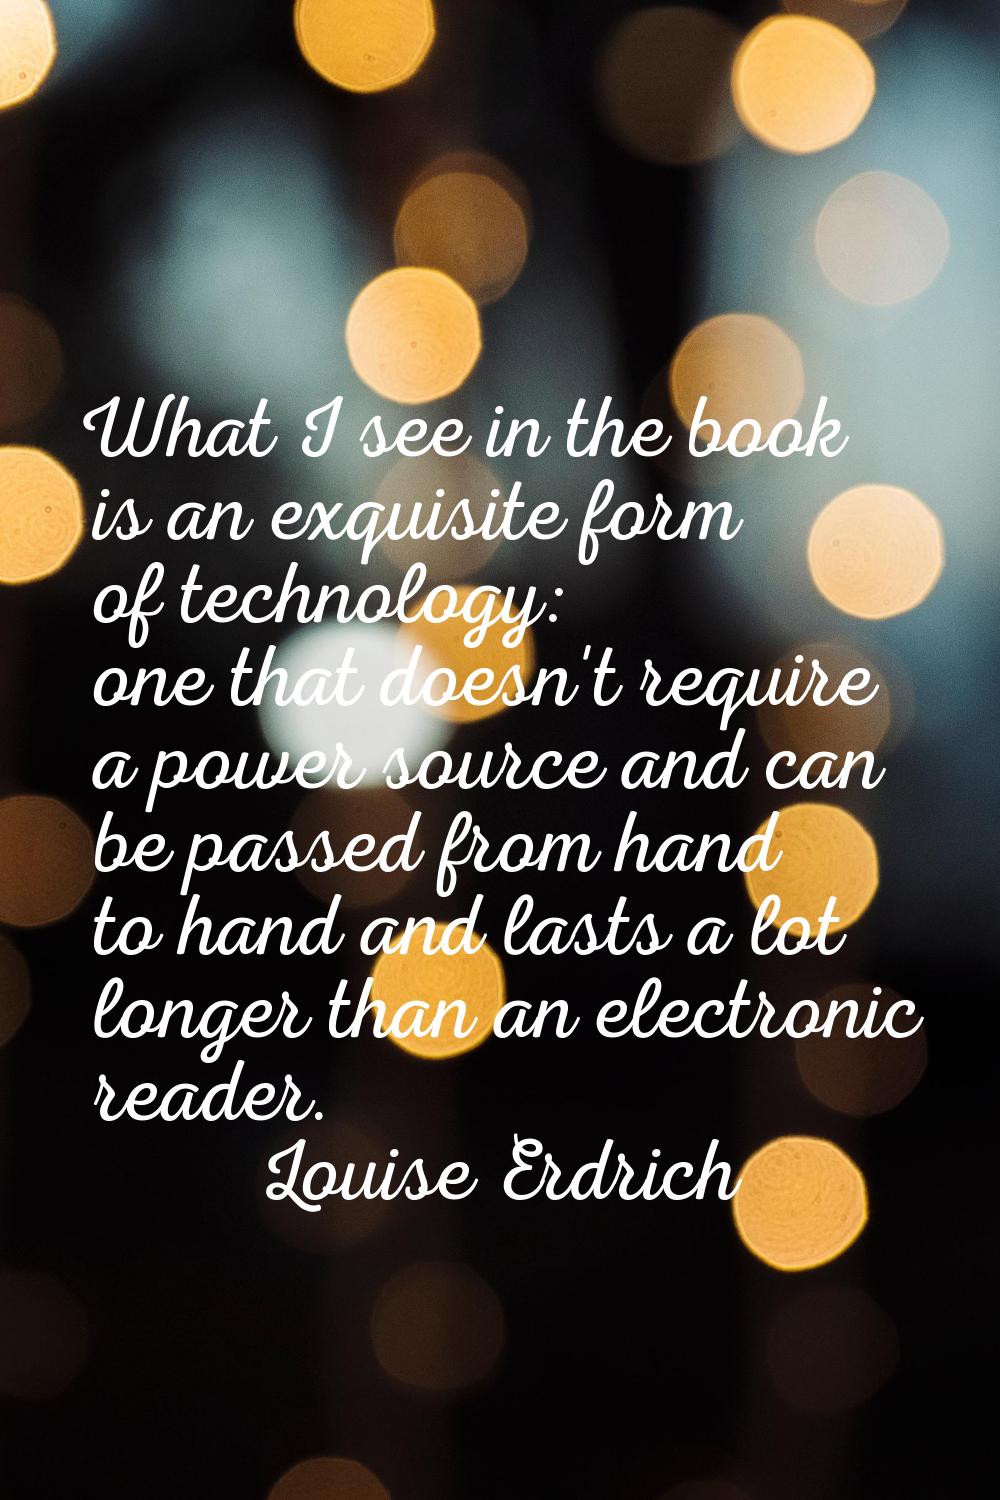 What I see in the book is an exquisite form of technology: one that doesn't require a power source 